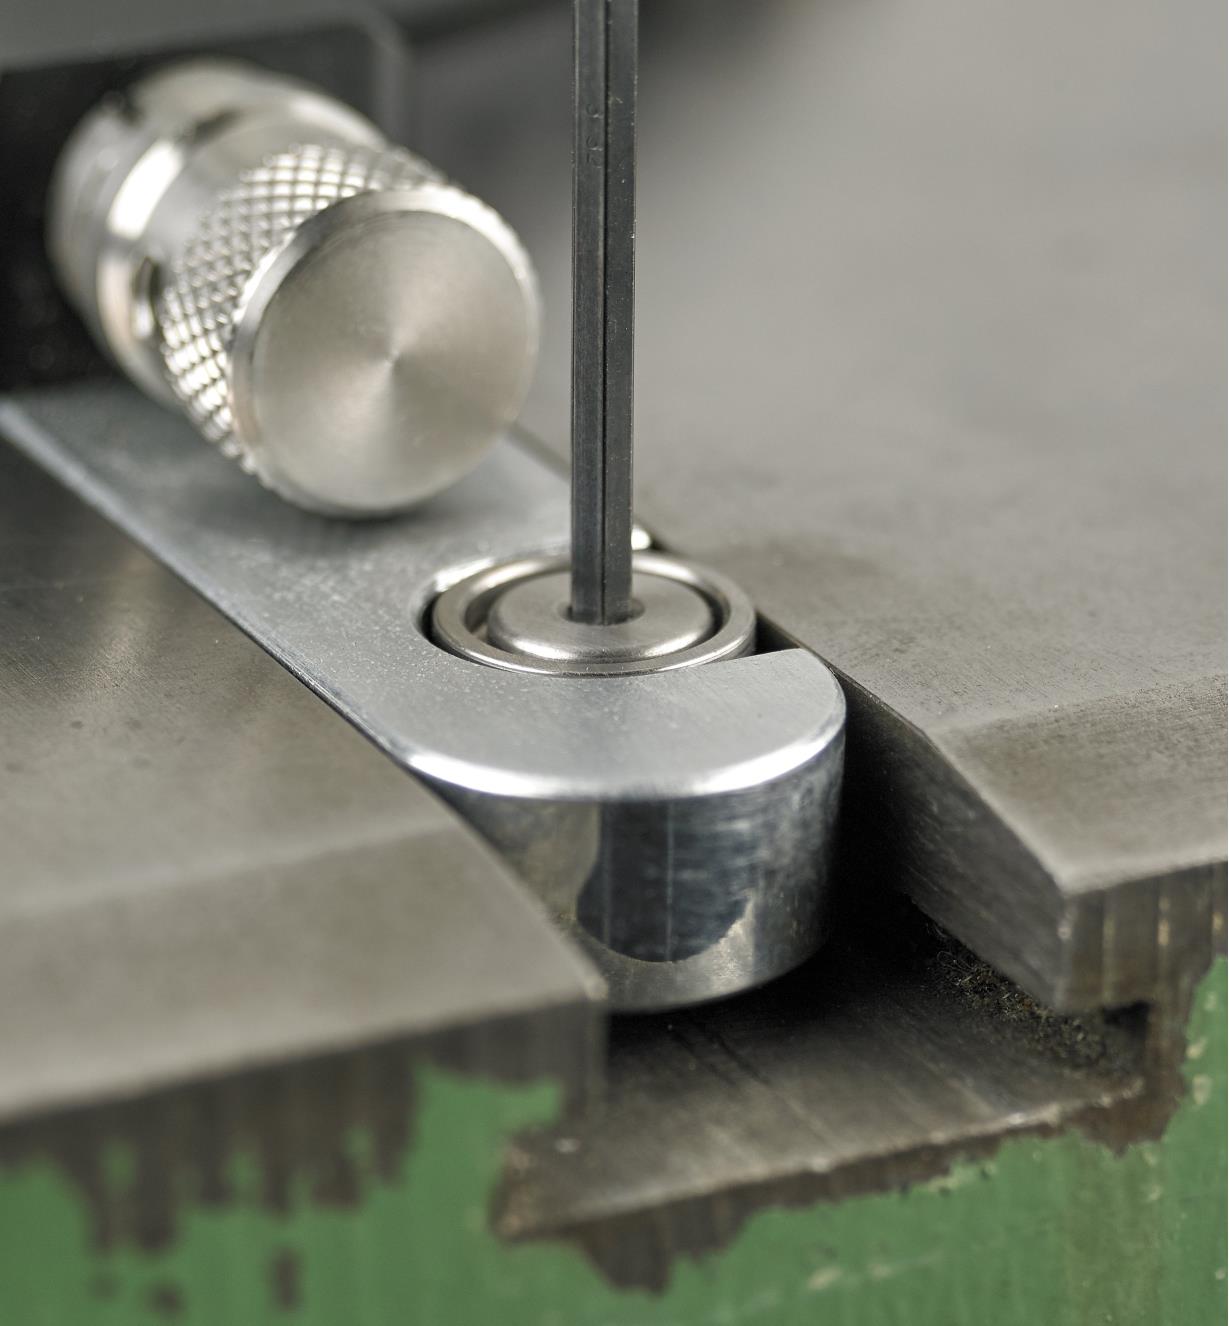 Tightening the bar snugger screws in the guide bar of the JessEm Mite-R-Excel II Miter Gauge